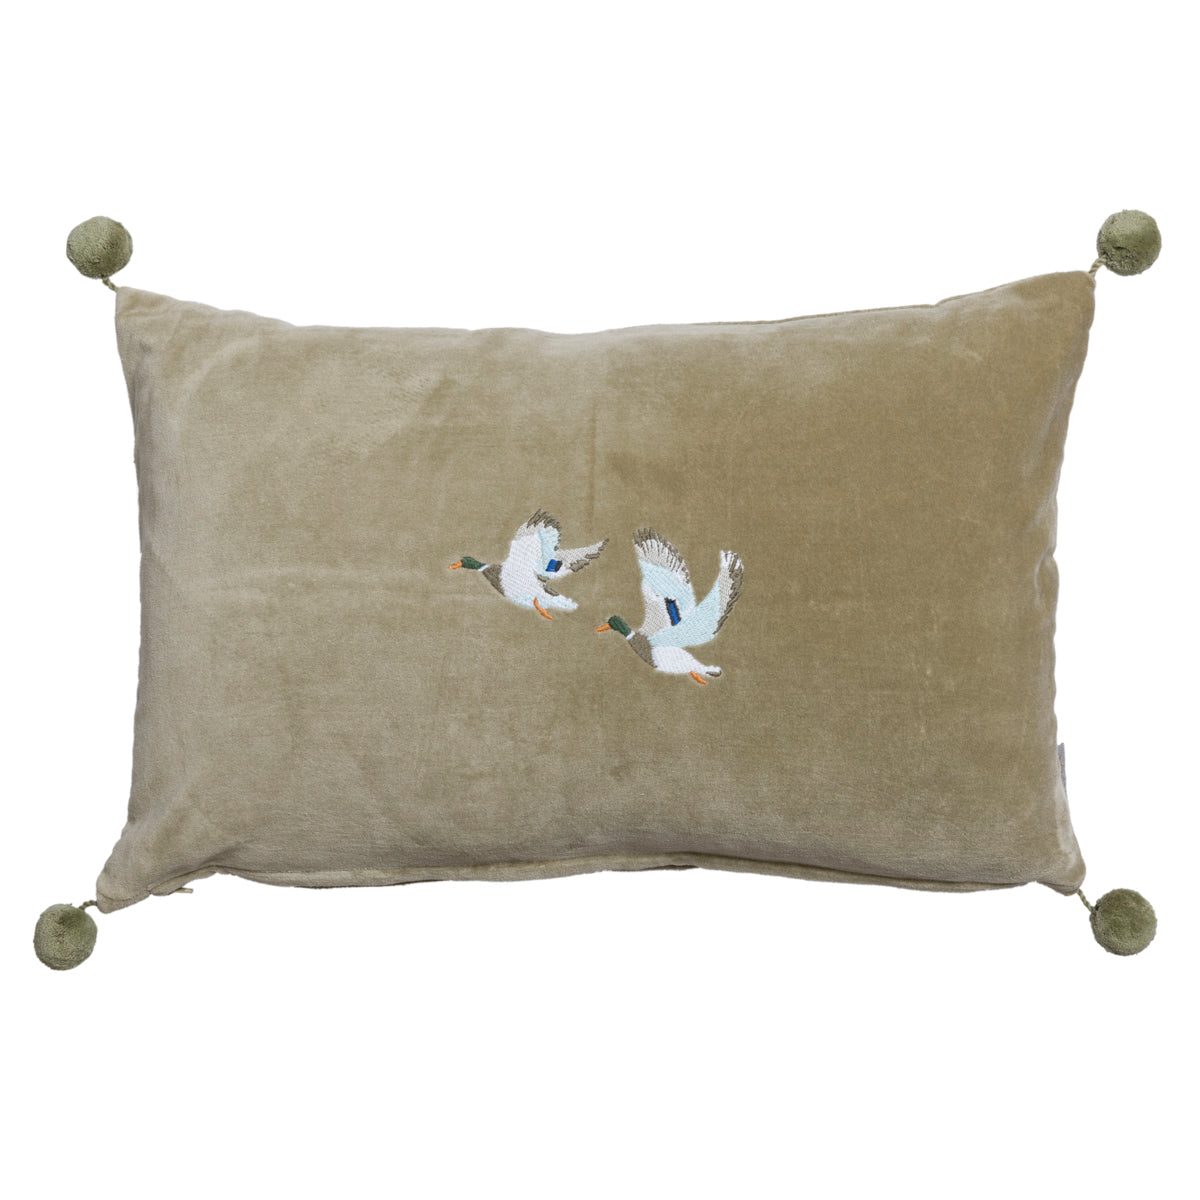 Ducks Embroidered Cushion by Sophie Allport